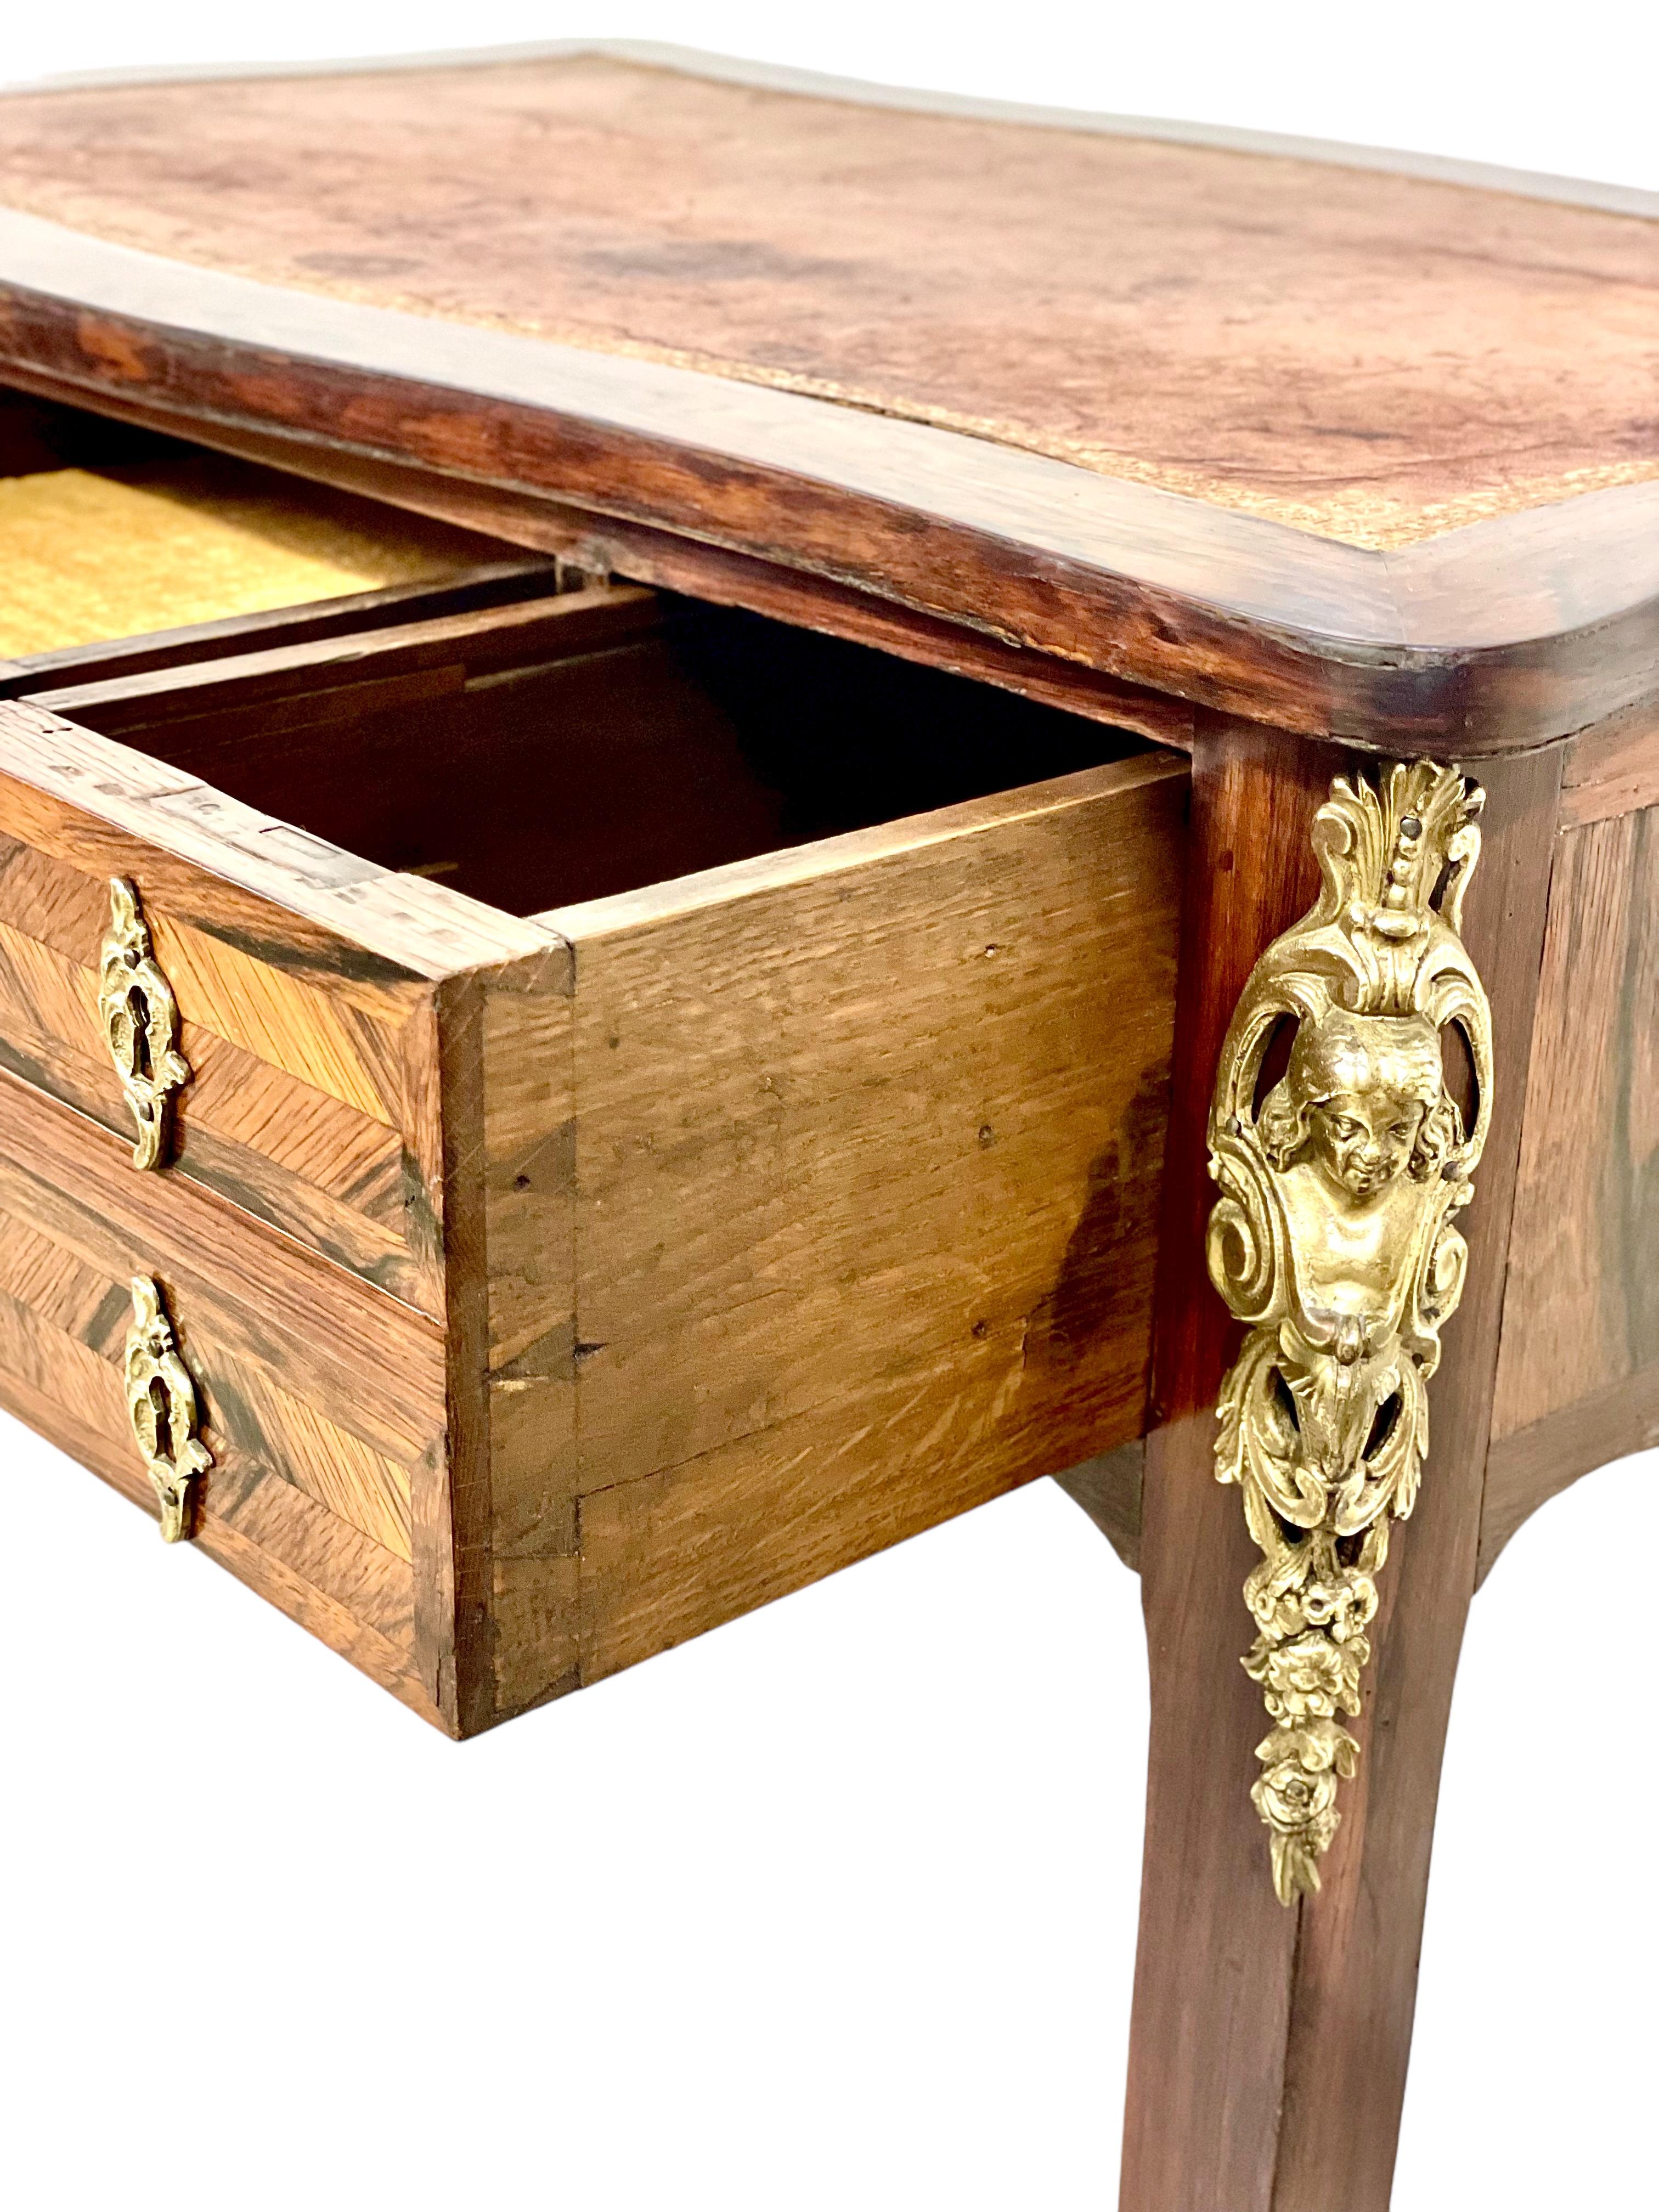 1750s Gilt Bronze Mounted Writing Lady Desk, by Adrien DELORME For Sale 8